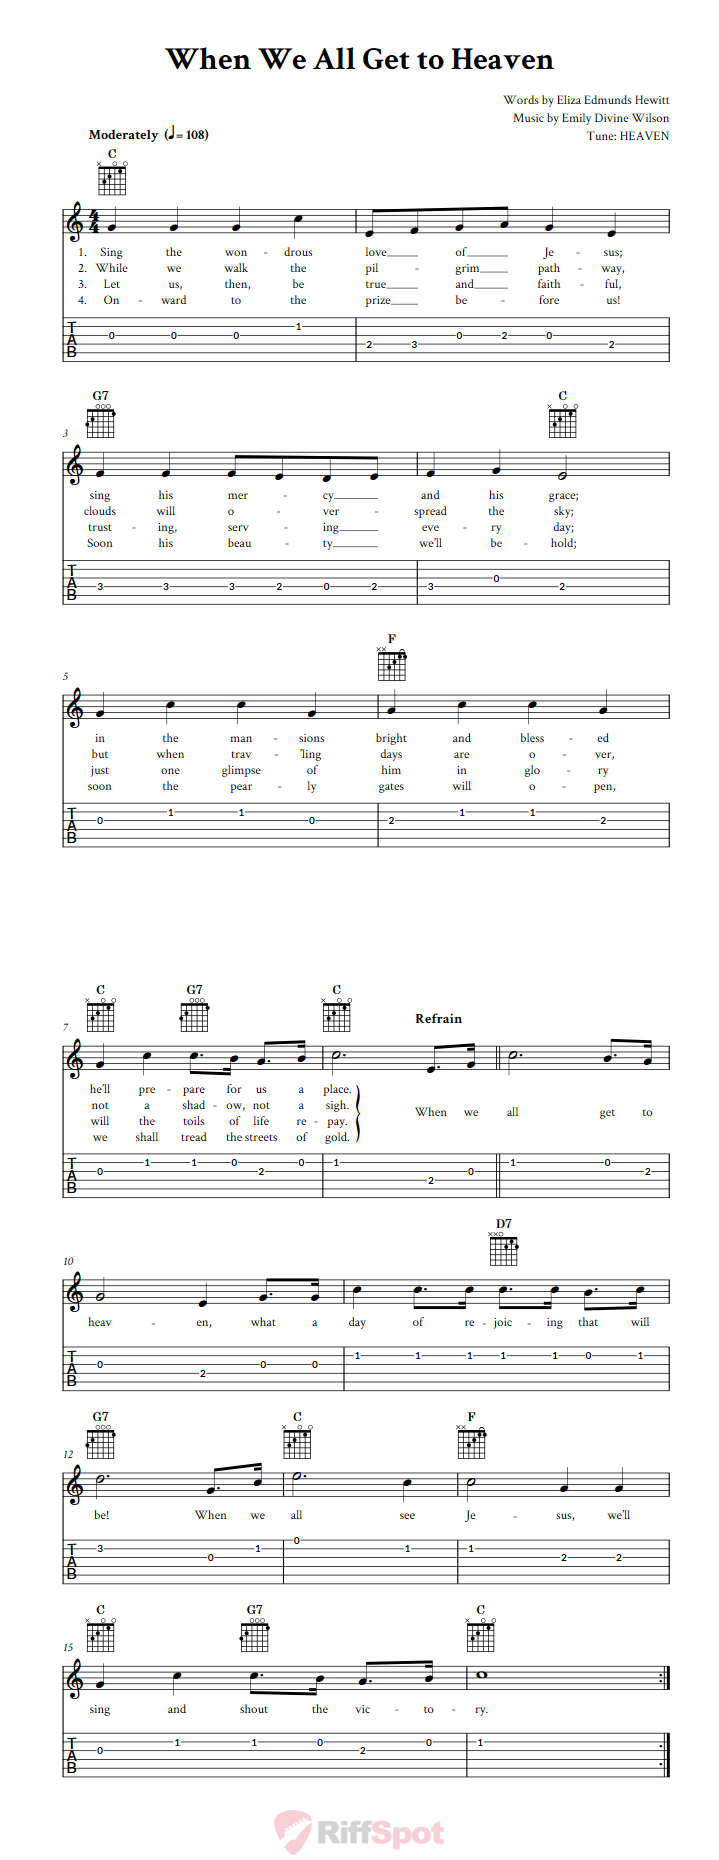 When We All Get to Heaven Guitar Tab